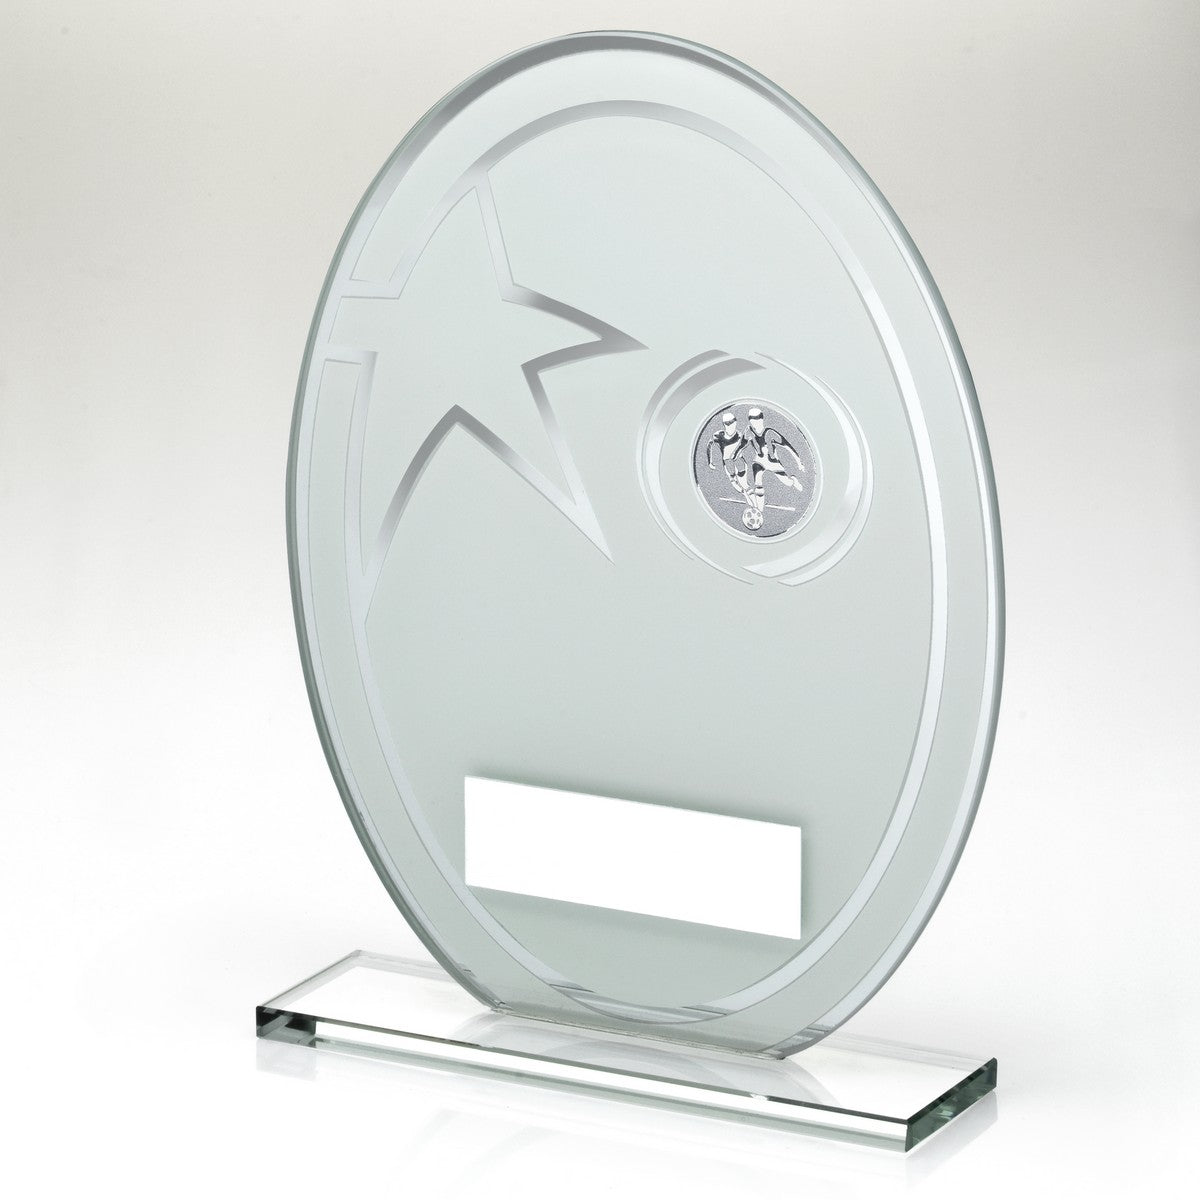 Printed Glass Oval with Football Insert Trophy